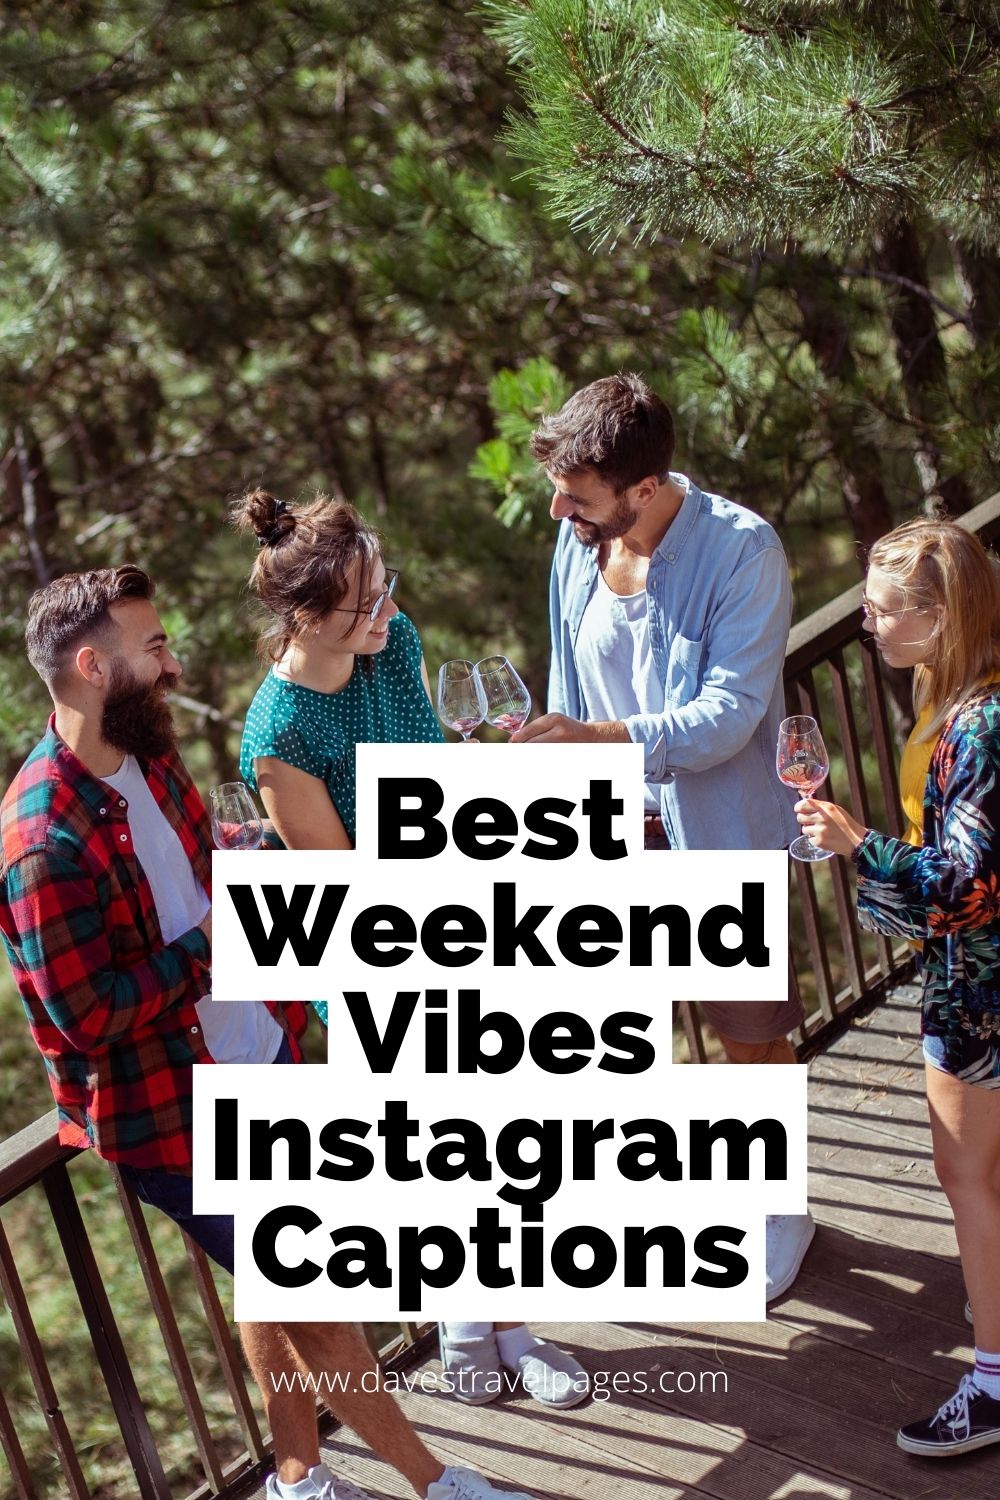 Instagram Captions For Weekend Vibes